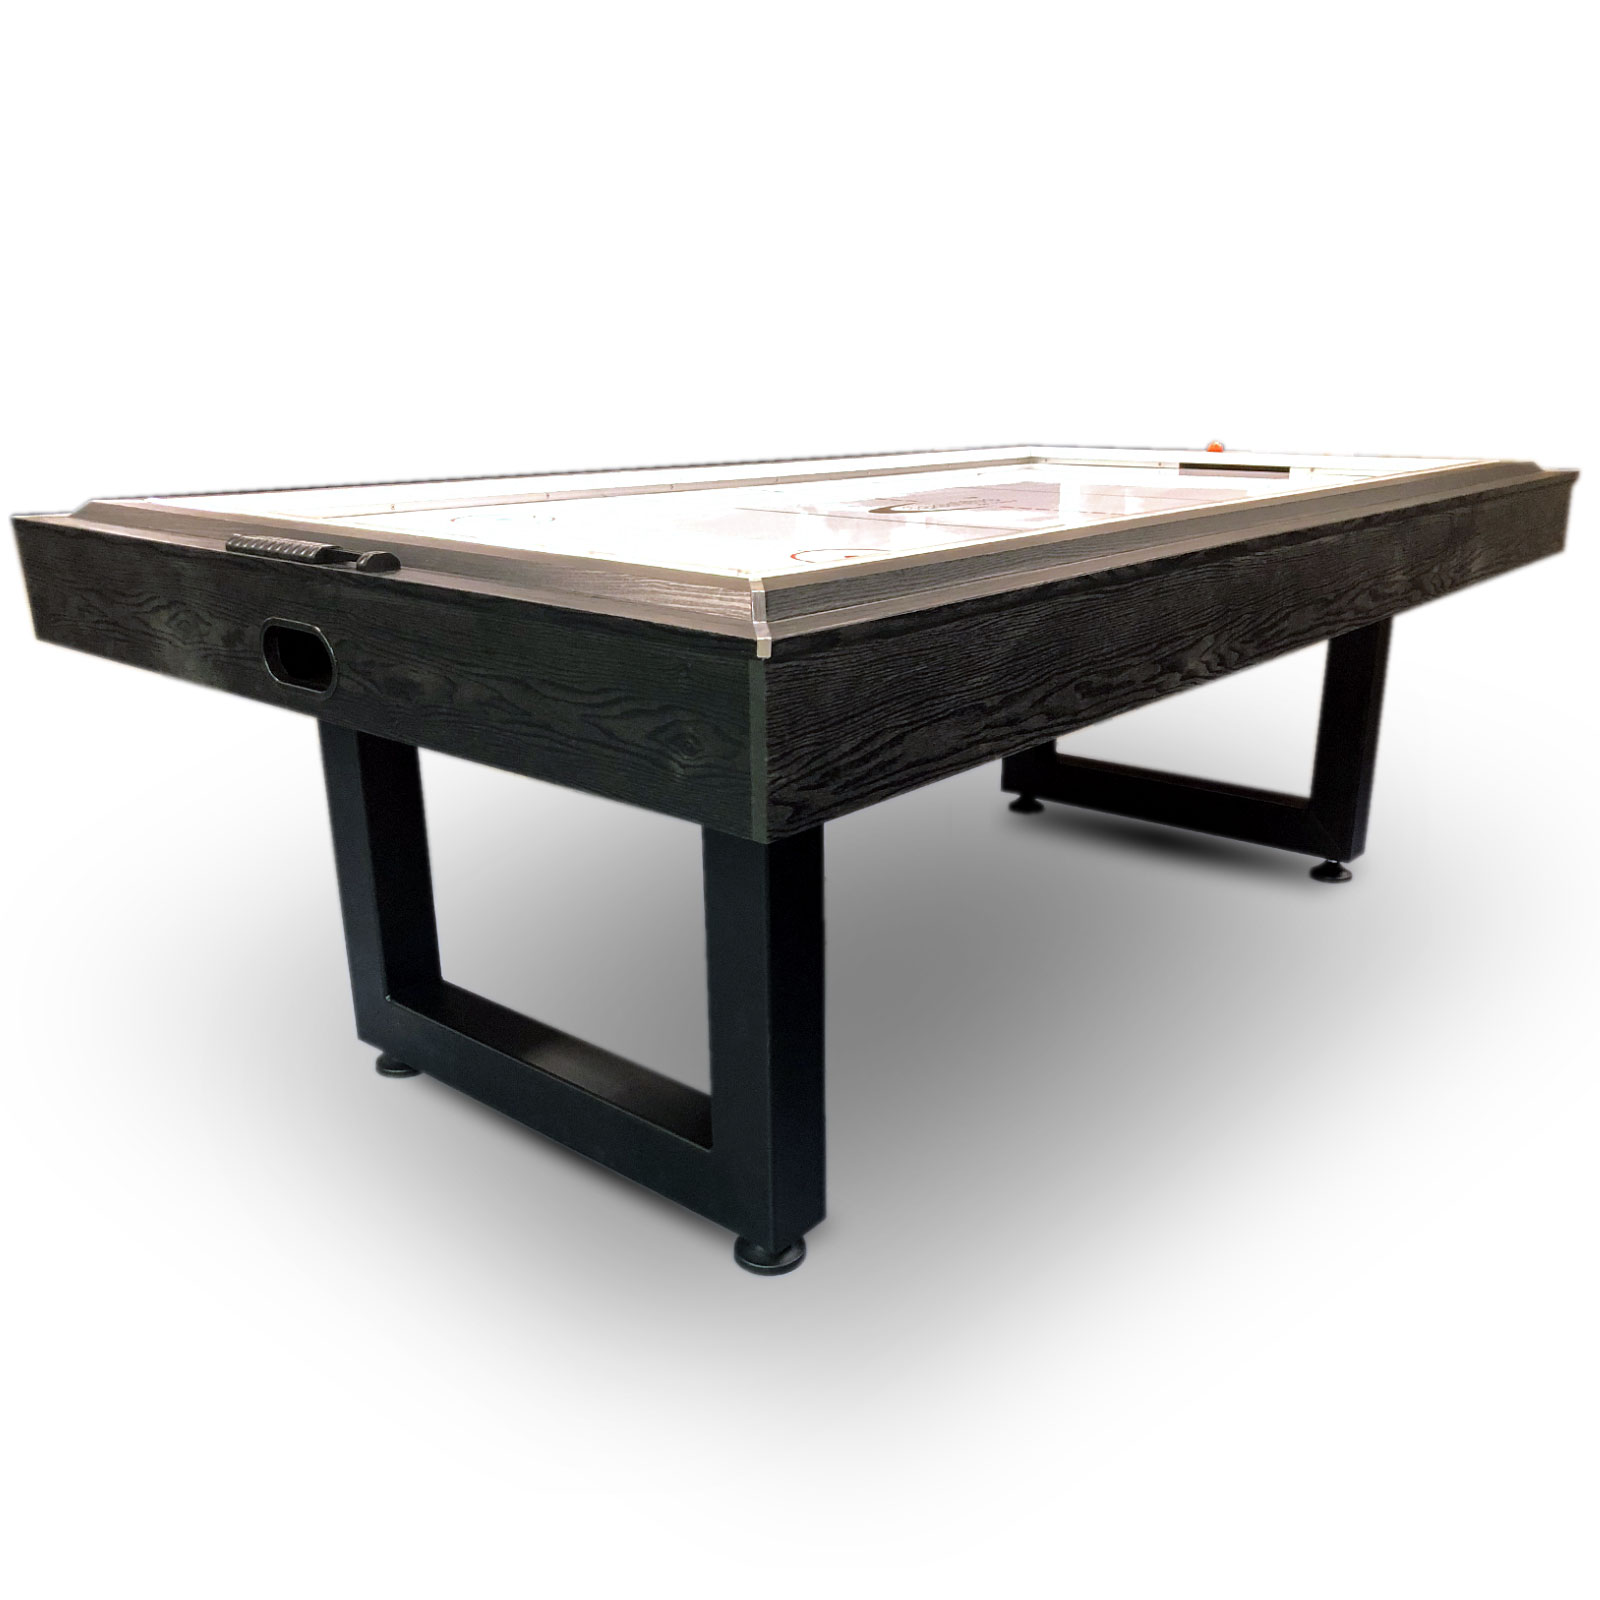 Tornado - 8ft Air Hockey Table with PVC Top, Steel Frame